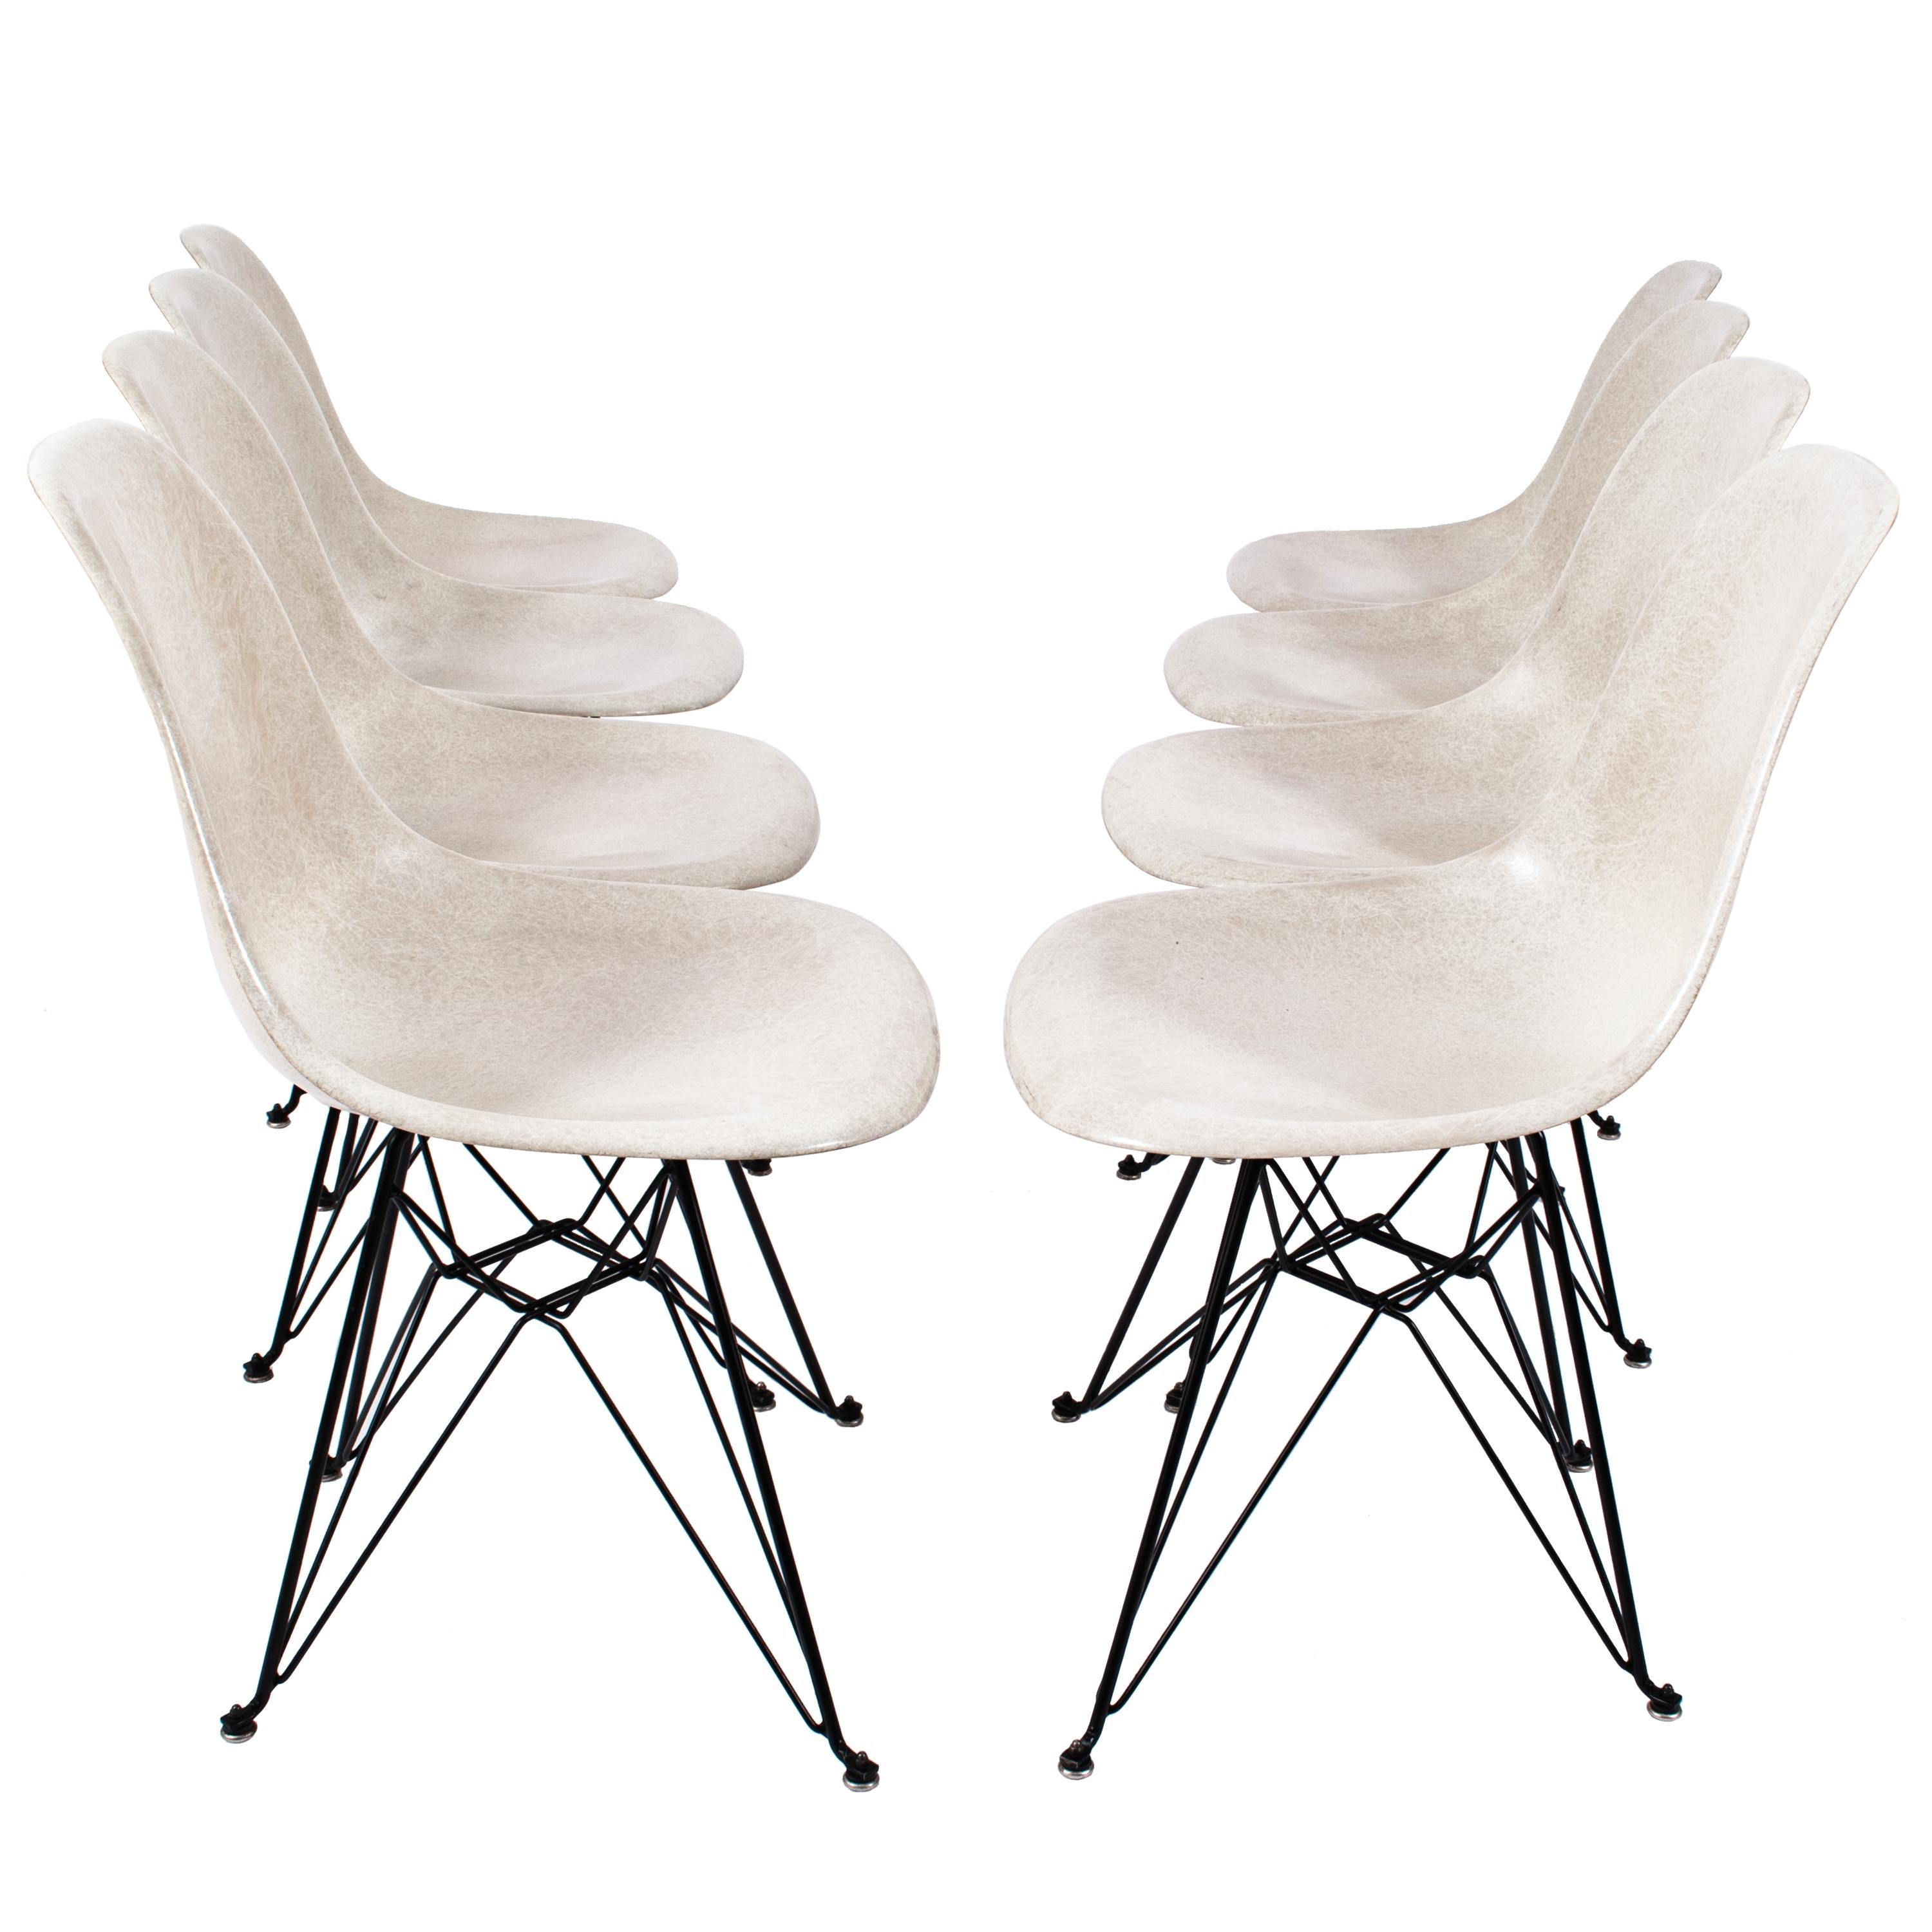 A good set of eight Eames fiberglass shell chairs with 